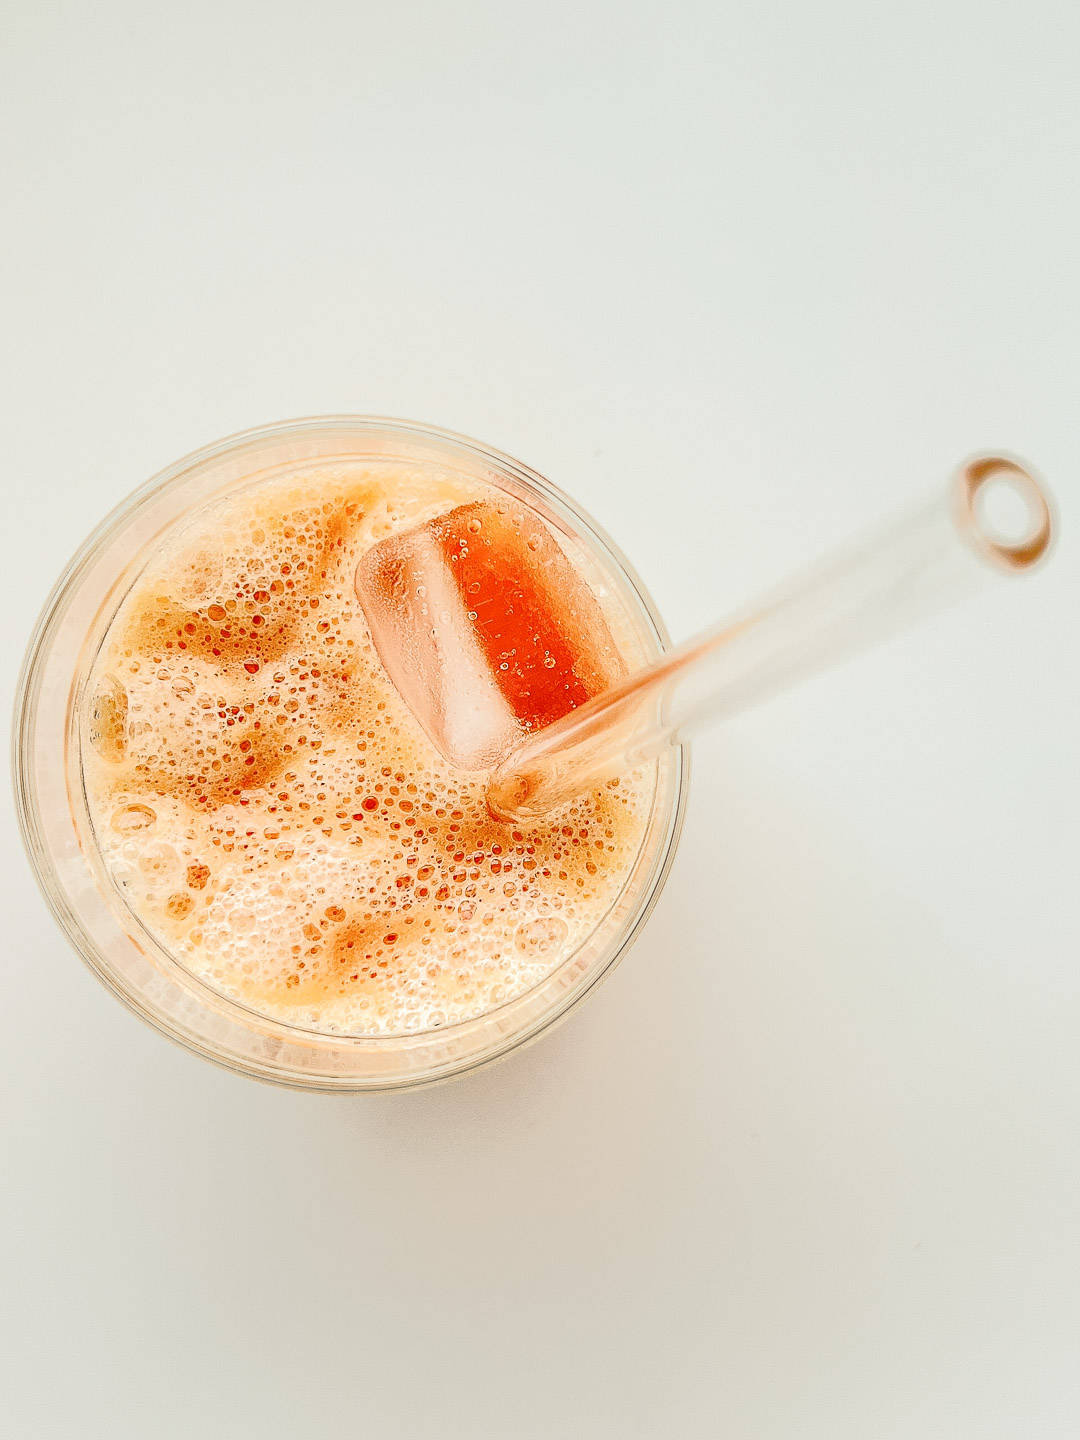 An image of an orange smoothie in a glass with a glass jar.